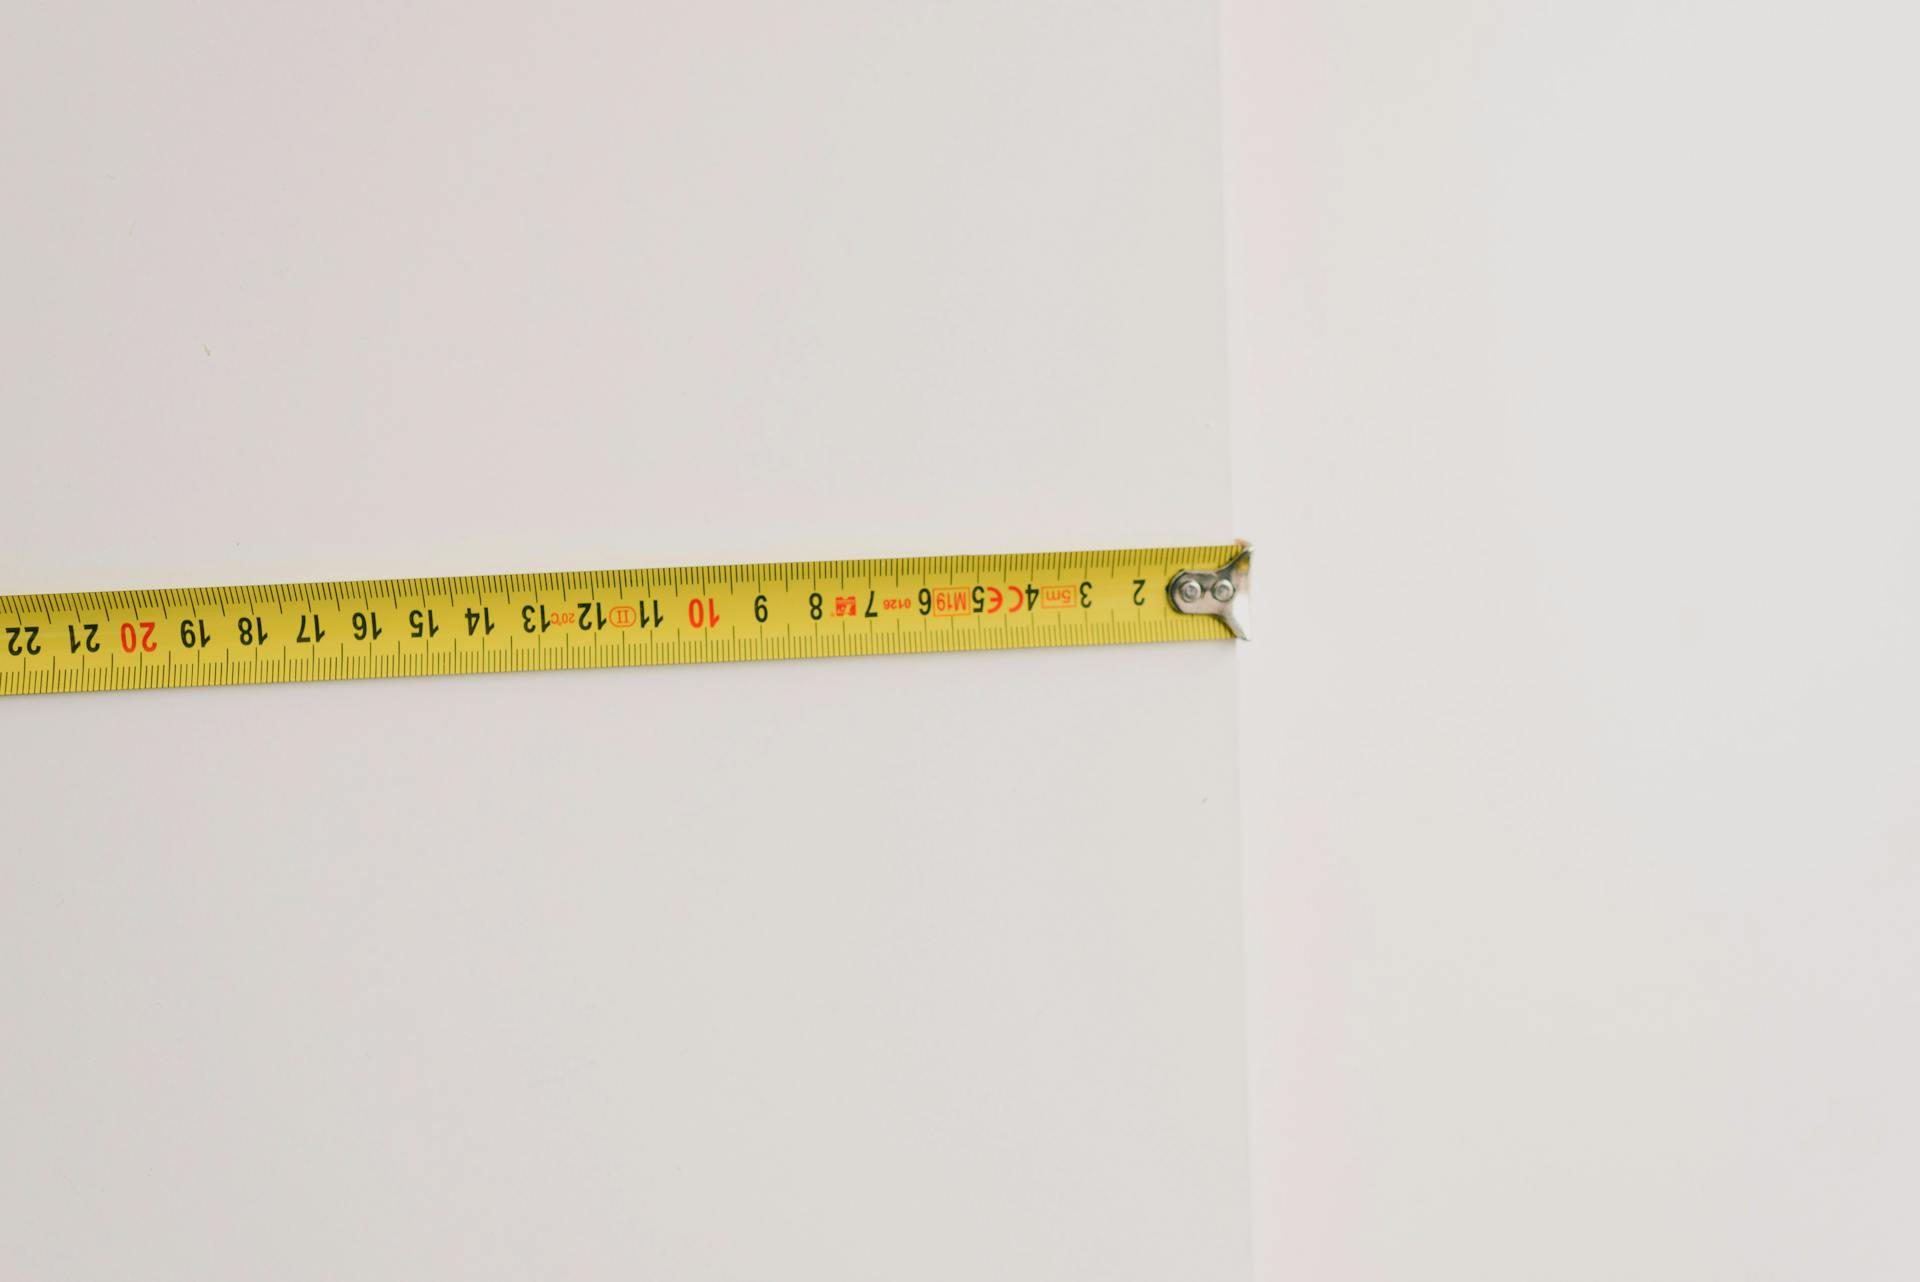 Measuring tape on empty white background